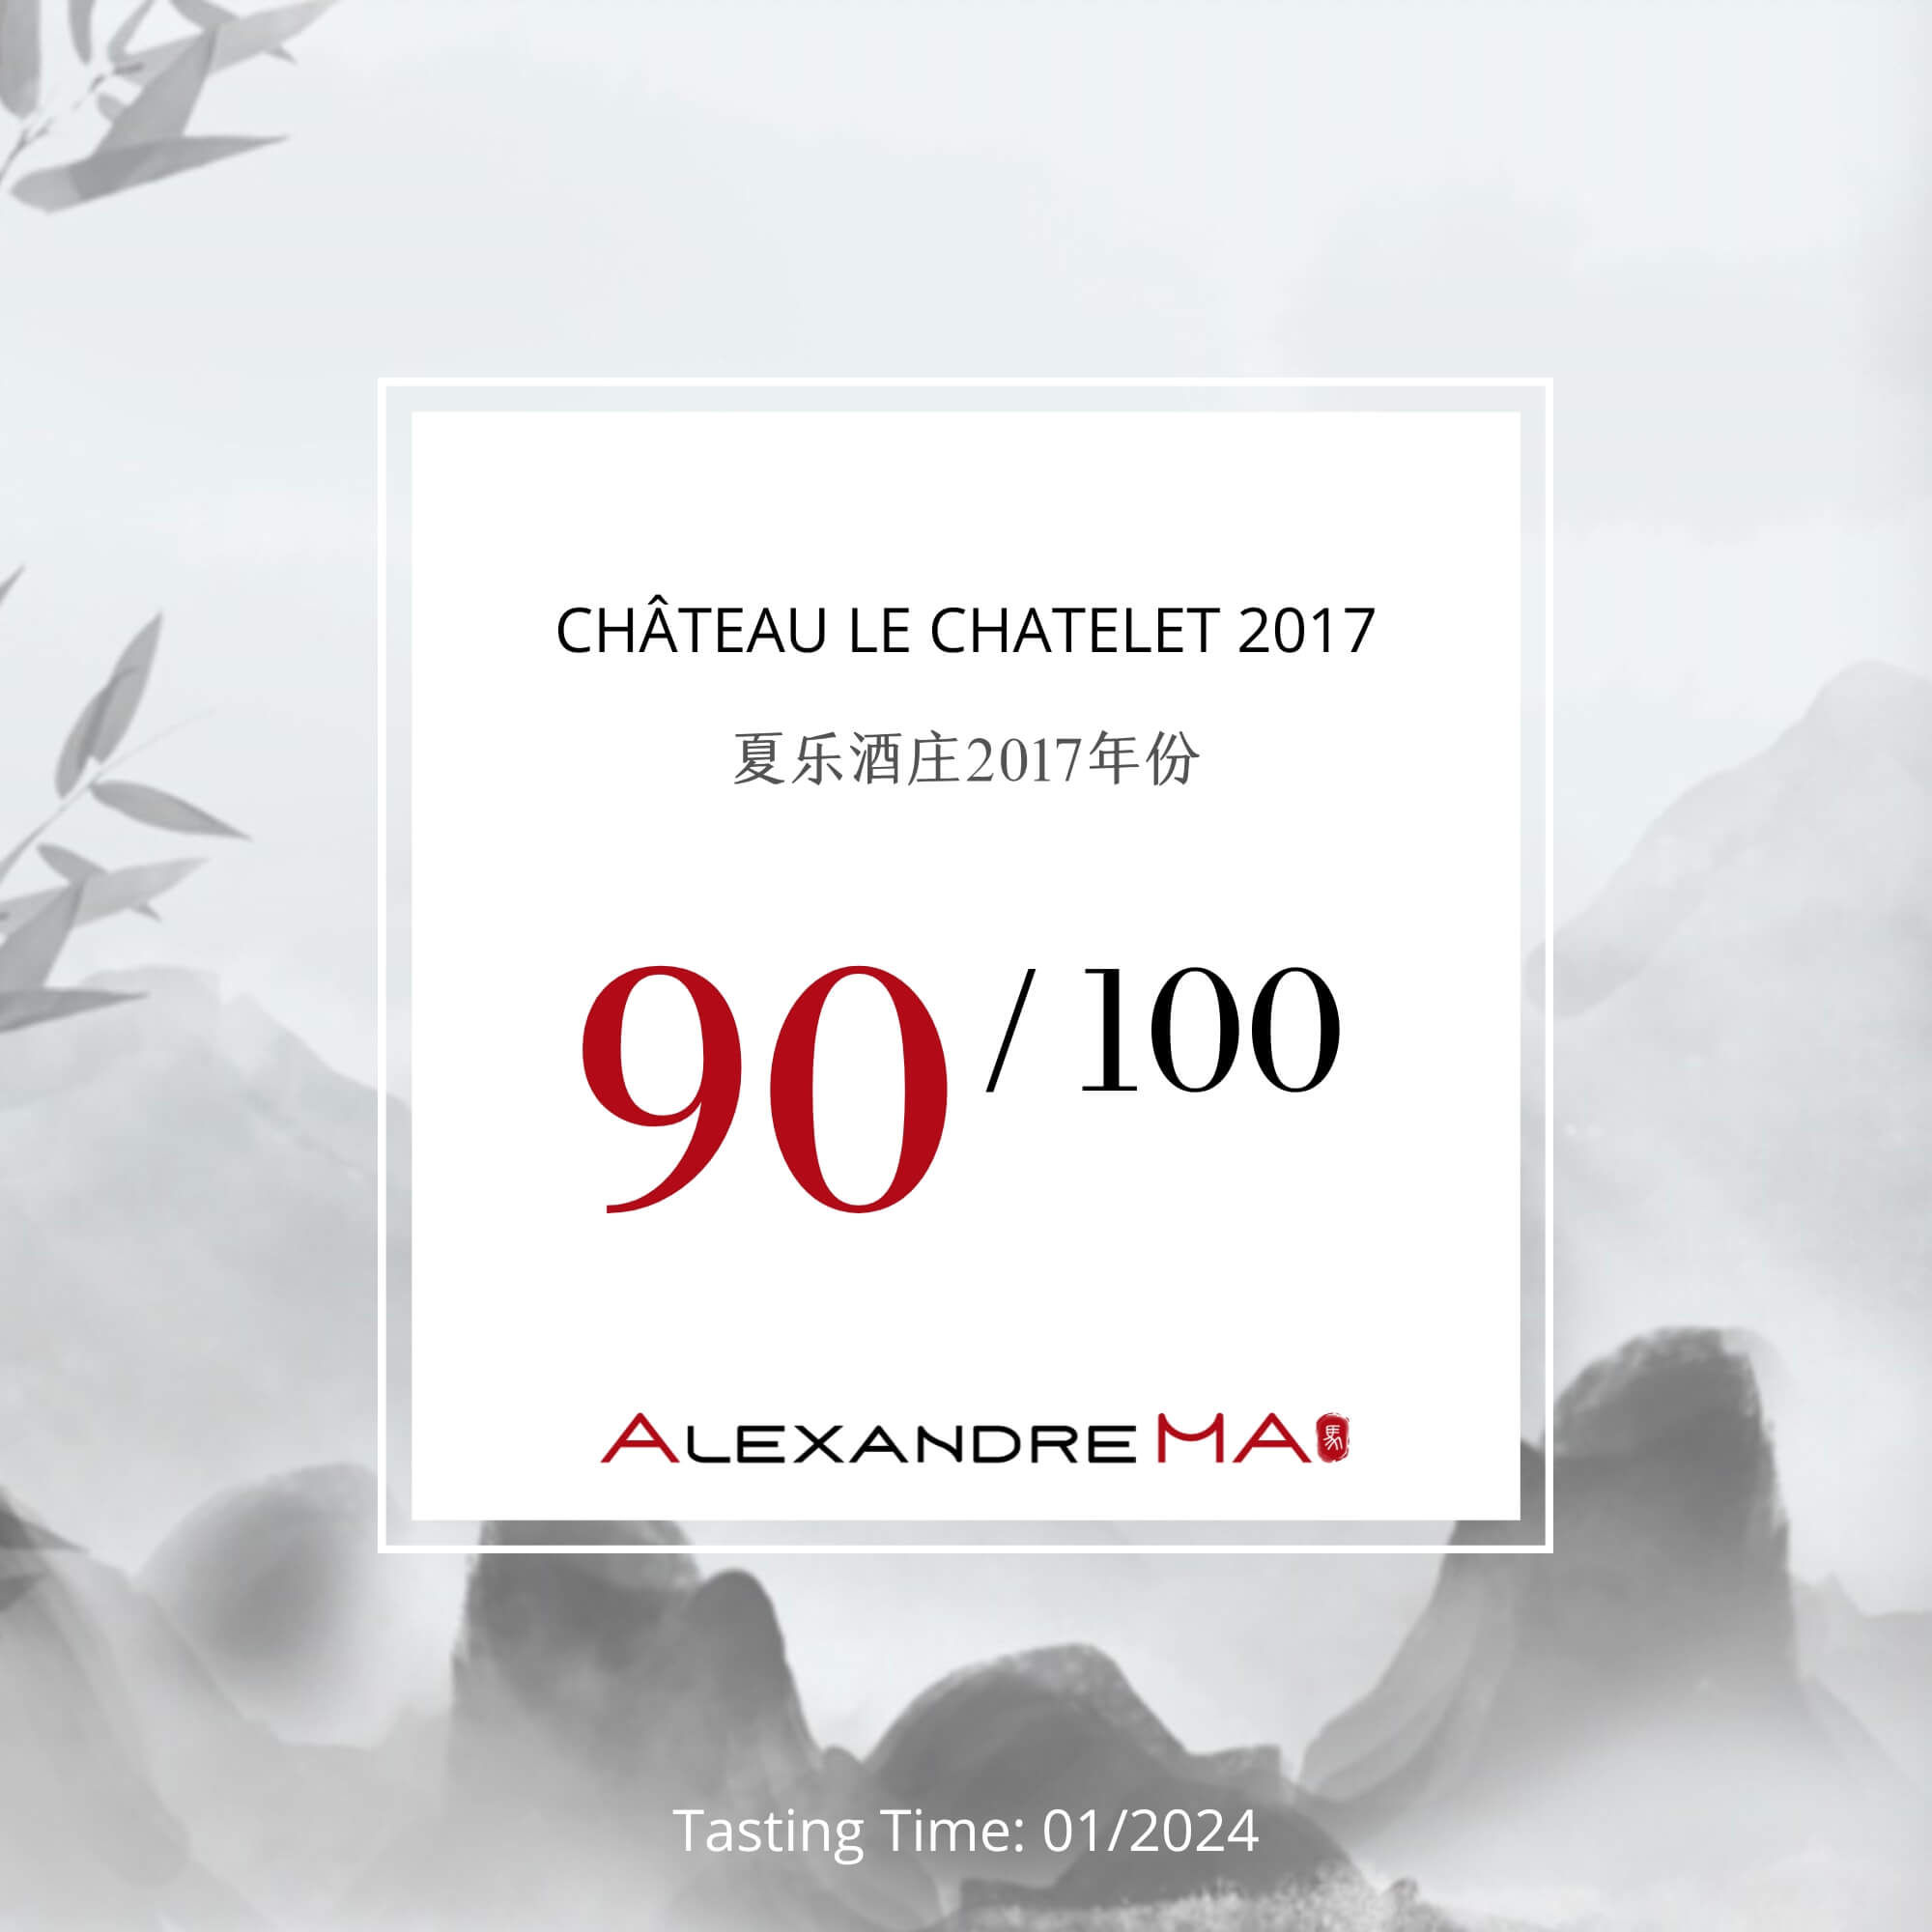 Château Le Chatelet 2017-夏乐酒庄 - Alexandre Ma